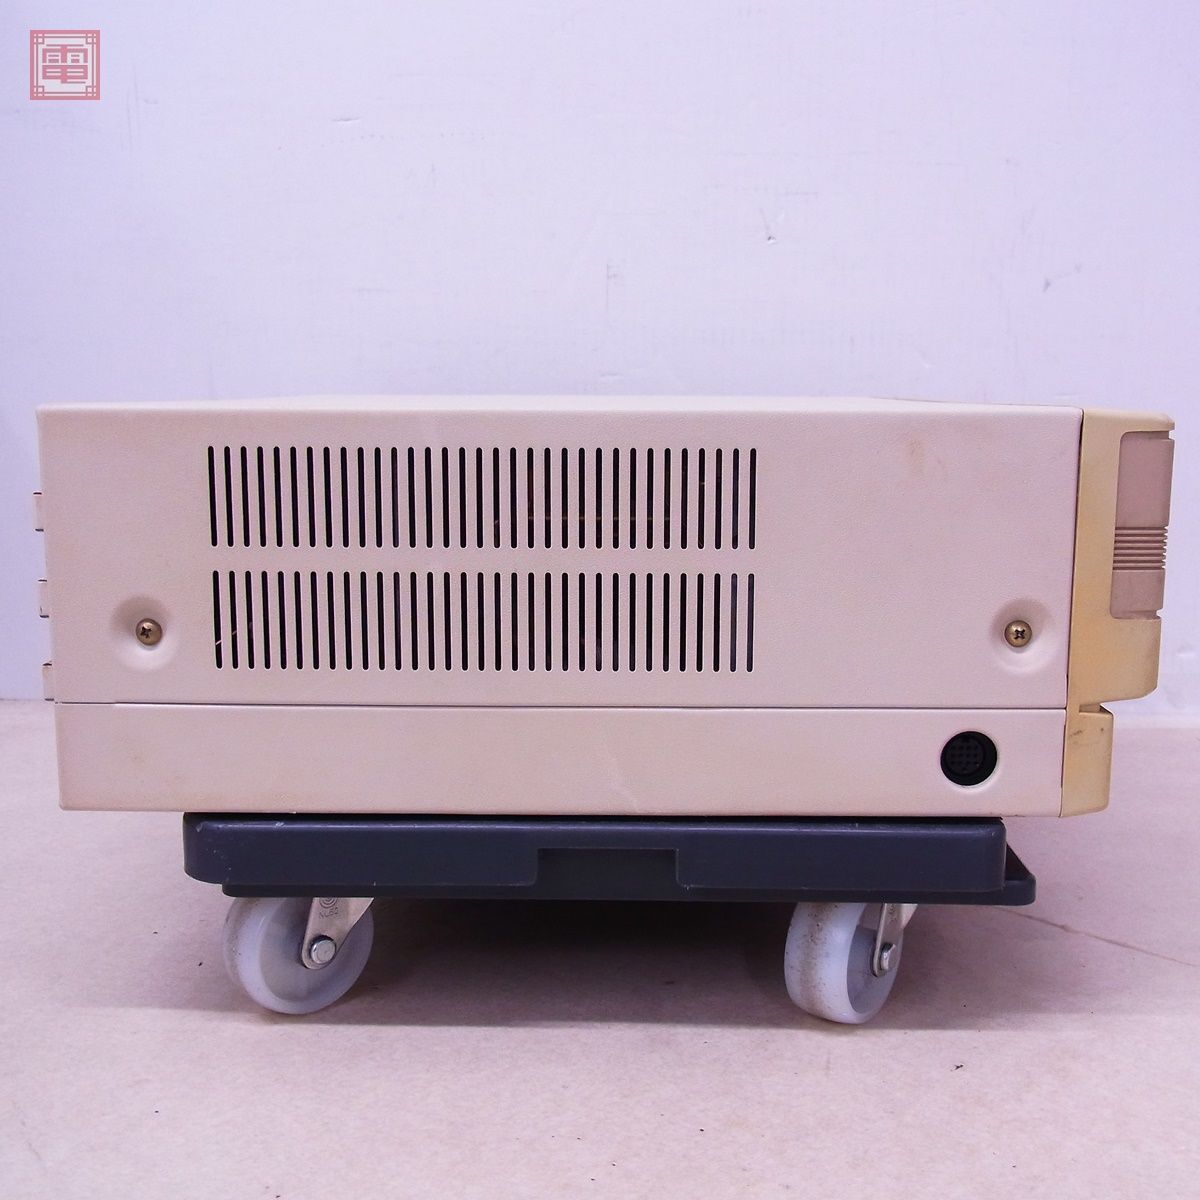 NEC PC-8801mkIISR body only electrification OK Japan electric Junk parts taking .. please [40